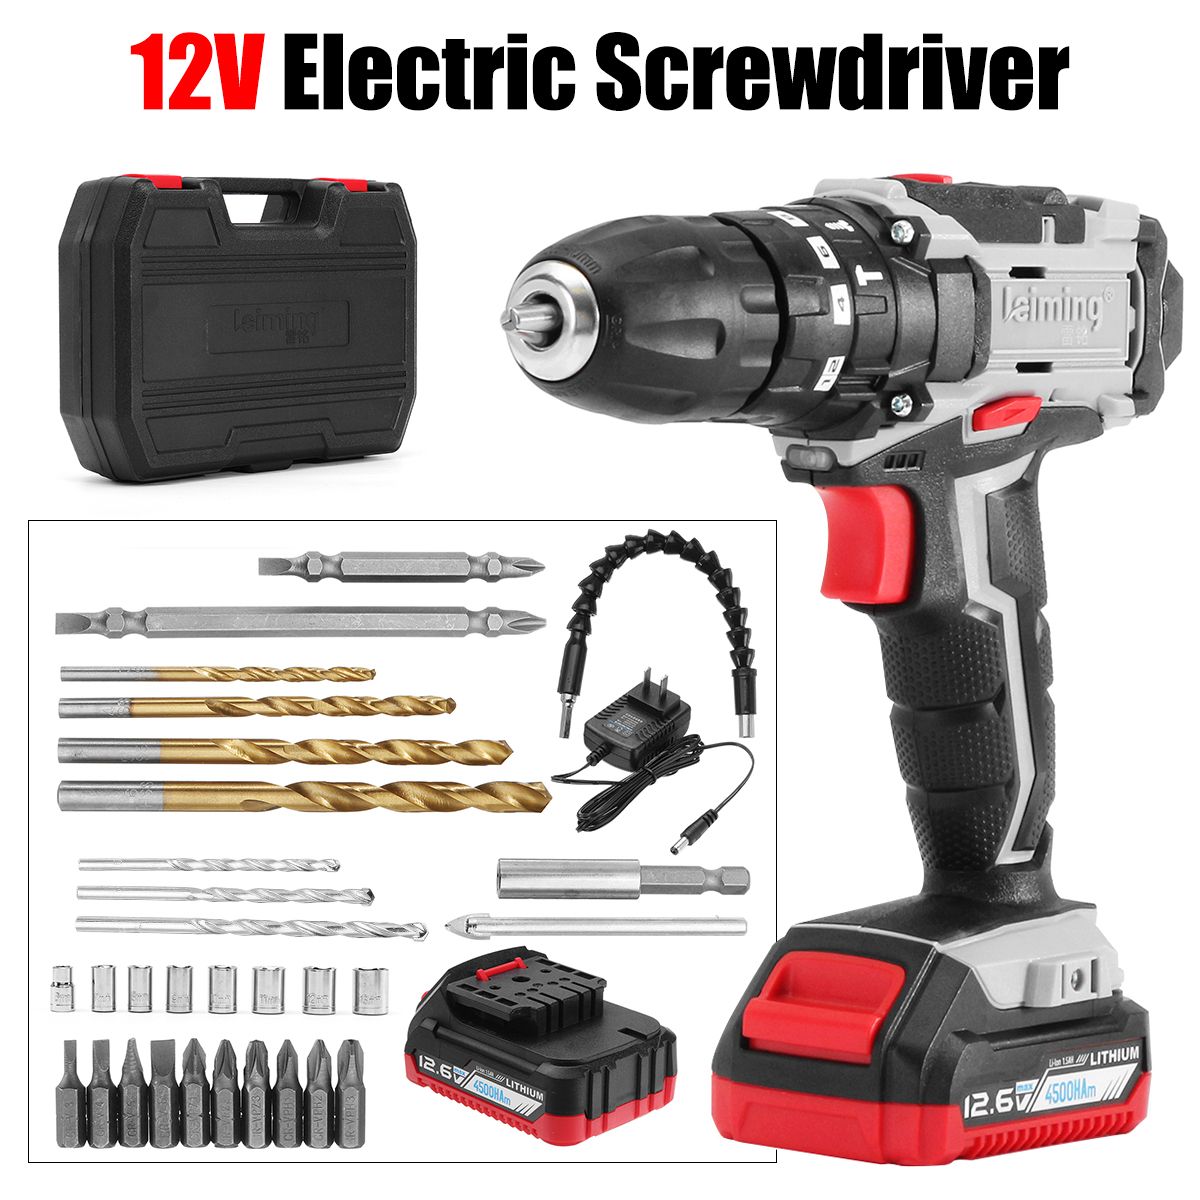 126V-Li-ion-Battery-Electric-Screwdriver-Cordless-Rechargeable-Power-Drill-with-LED-light-1297752